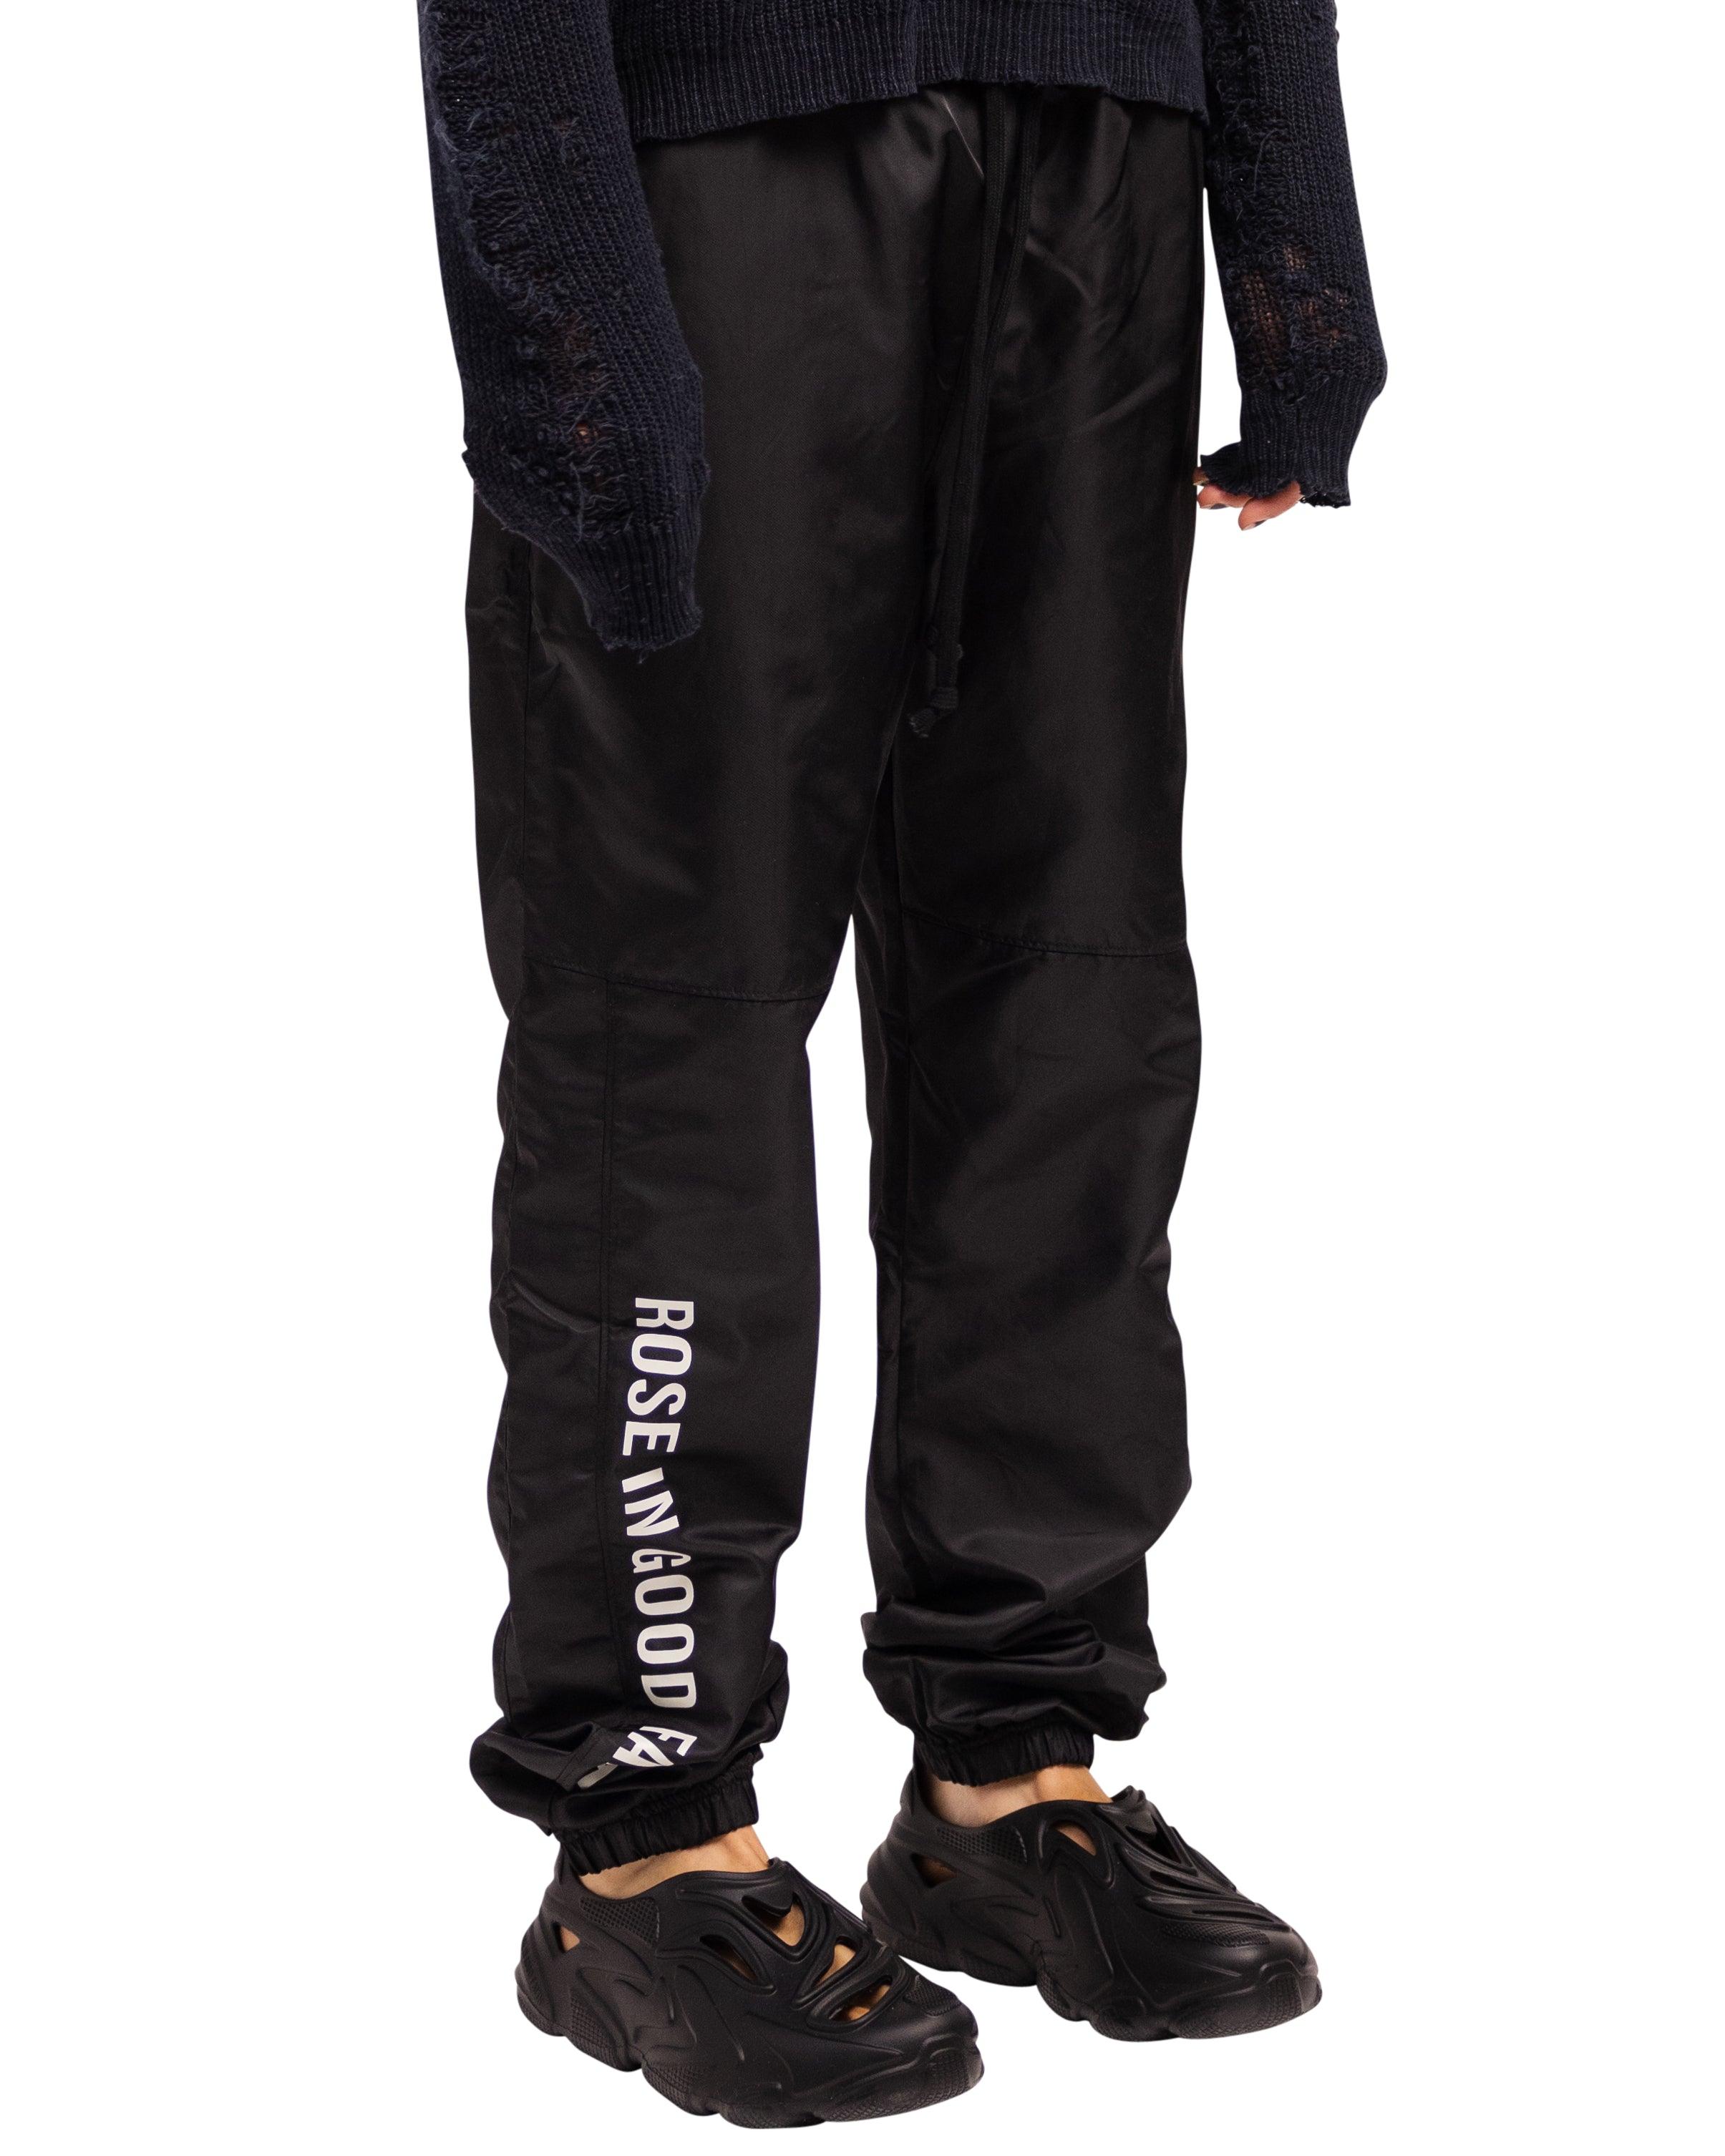 PANEL TRACK PANTS - PANEL TRACK PANTS - ROSE IN GOOD FAITH